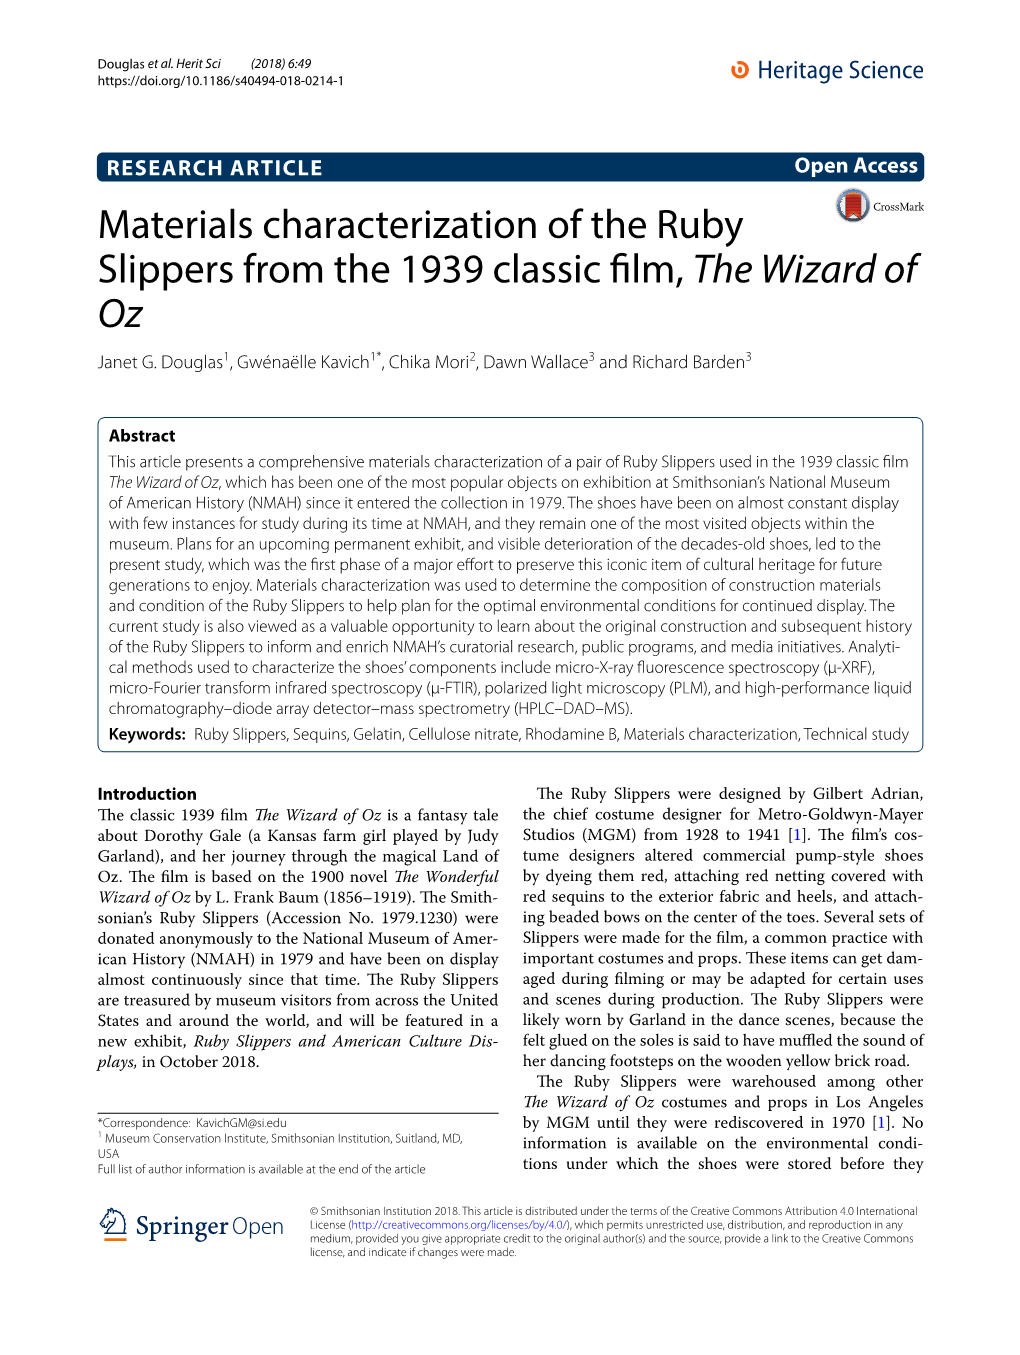 Materials Characterization of the Ruby Slippers from the 1939 Classic Film, the Wizard of Oz